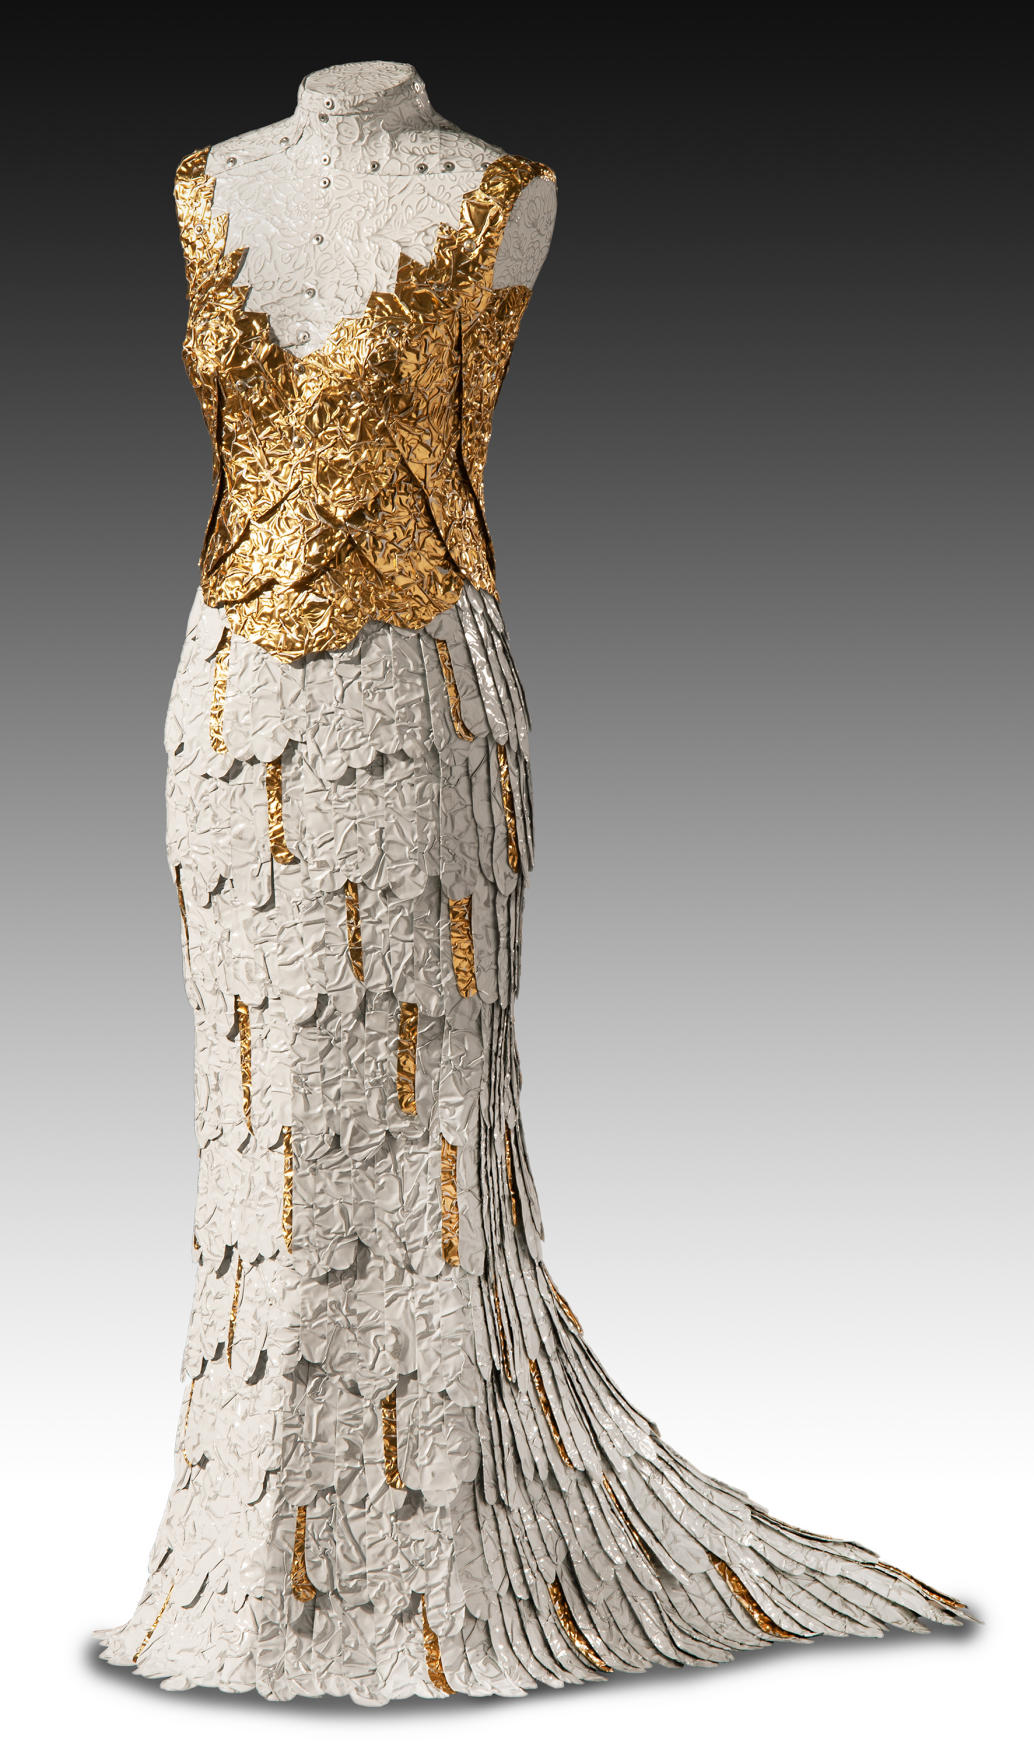 "Gold & White Gown"
29" Tall